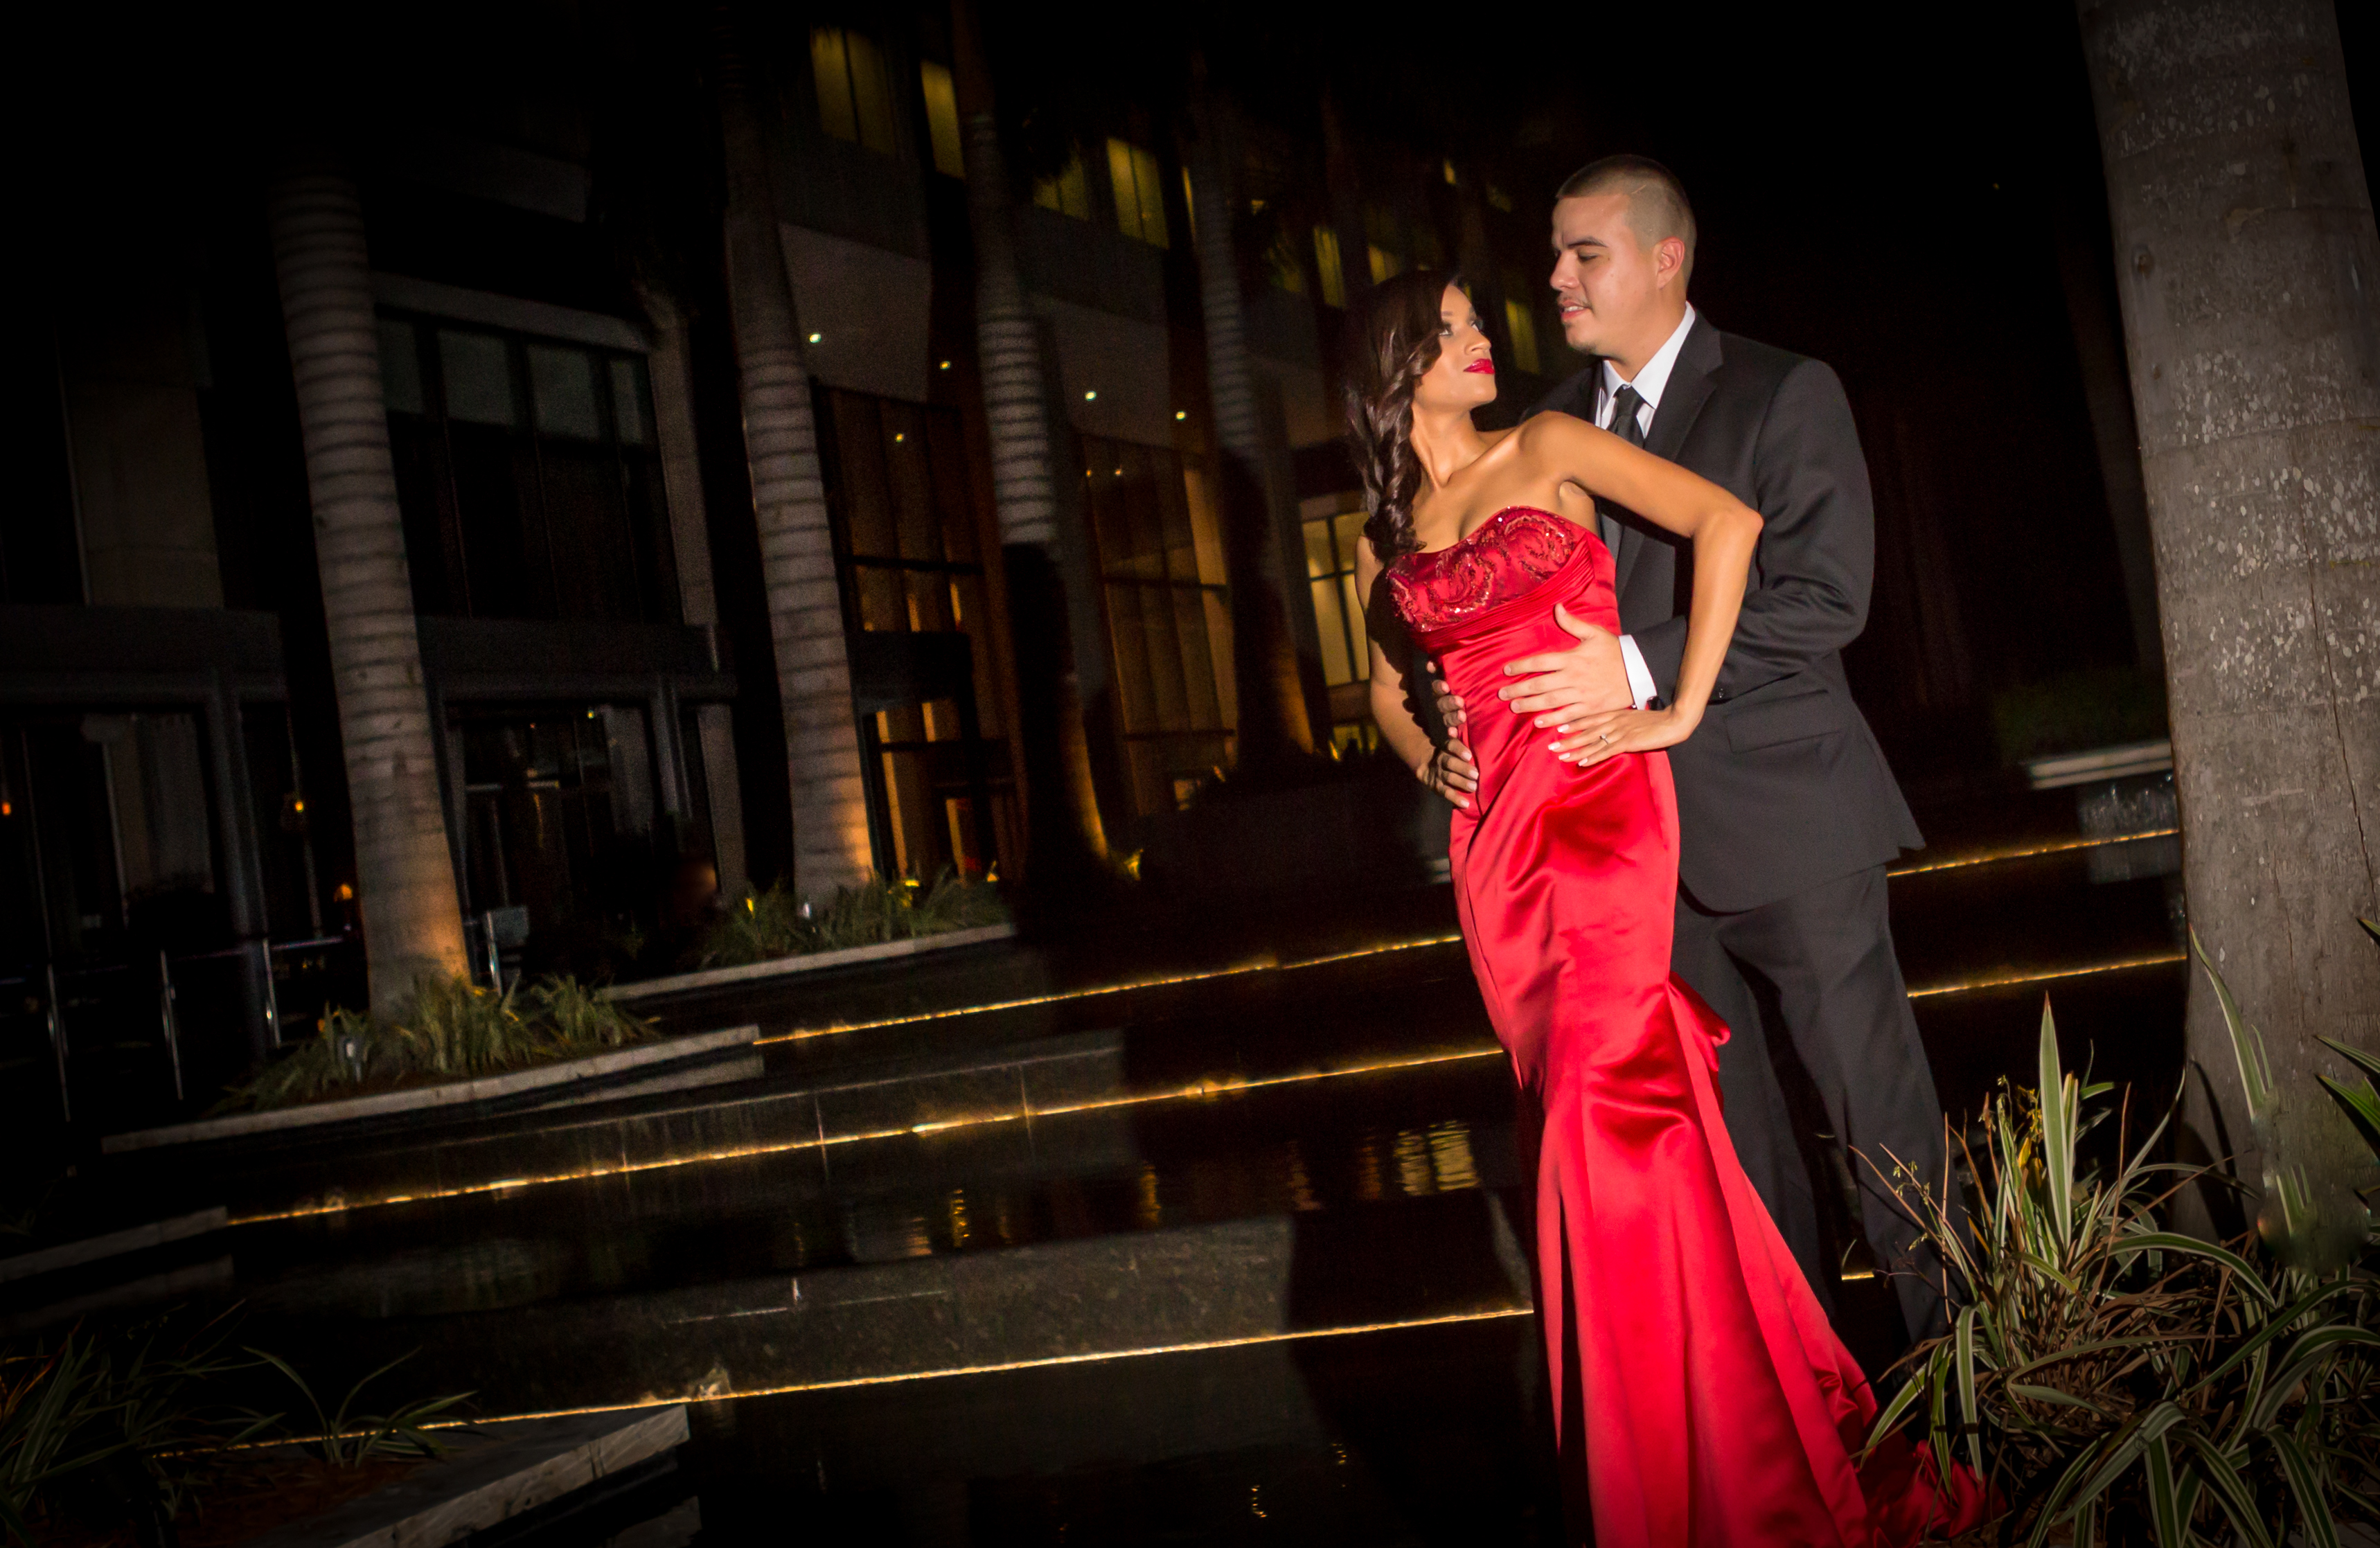 Alfredo Valentine Fort Lauderdale Photographer Aricelly and Angelo engagement photography session in Brickell Miami, Florida at 600 Biscayne Blvd and Tamarina Restaurant by Alfredo Valentine Photographer owner of Couture Bridal Photography